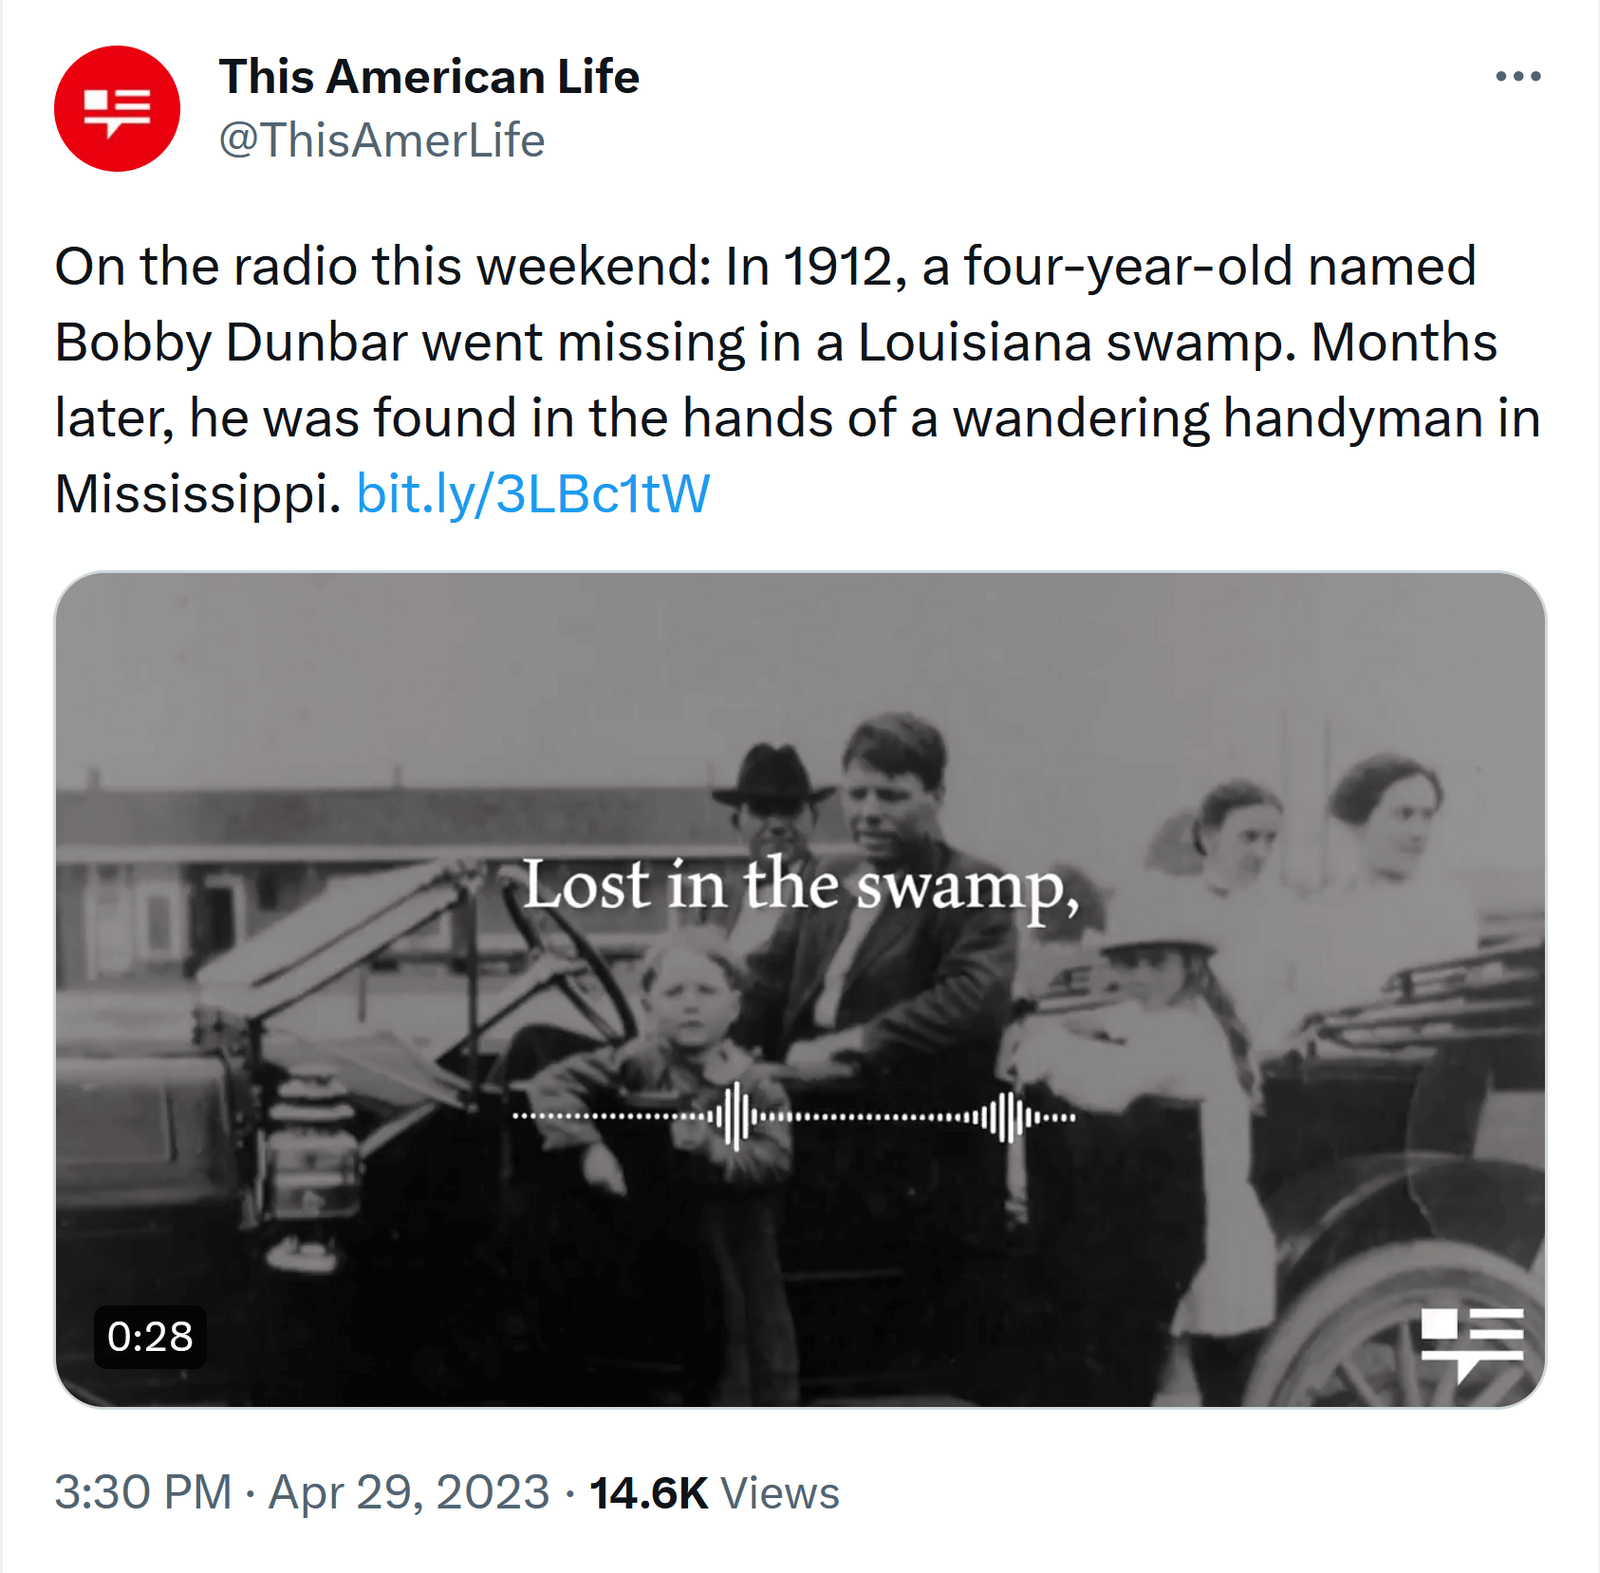 an example of 30-second snippets from “This American Life” on Twitter